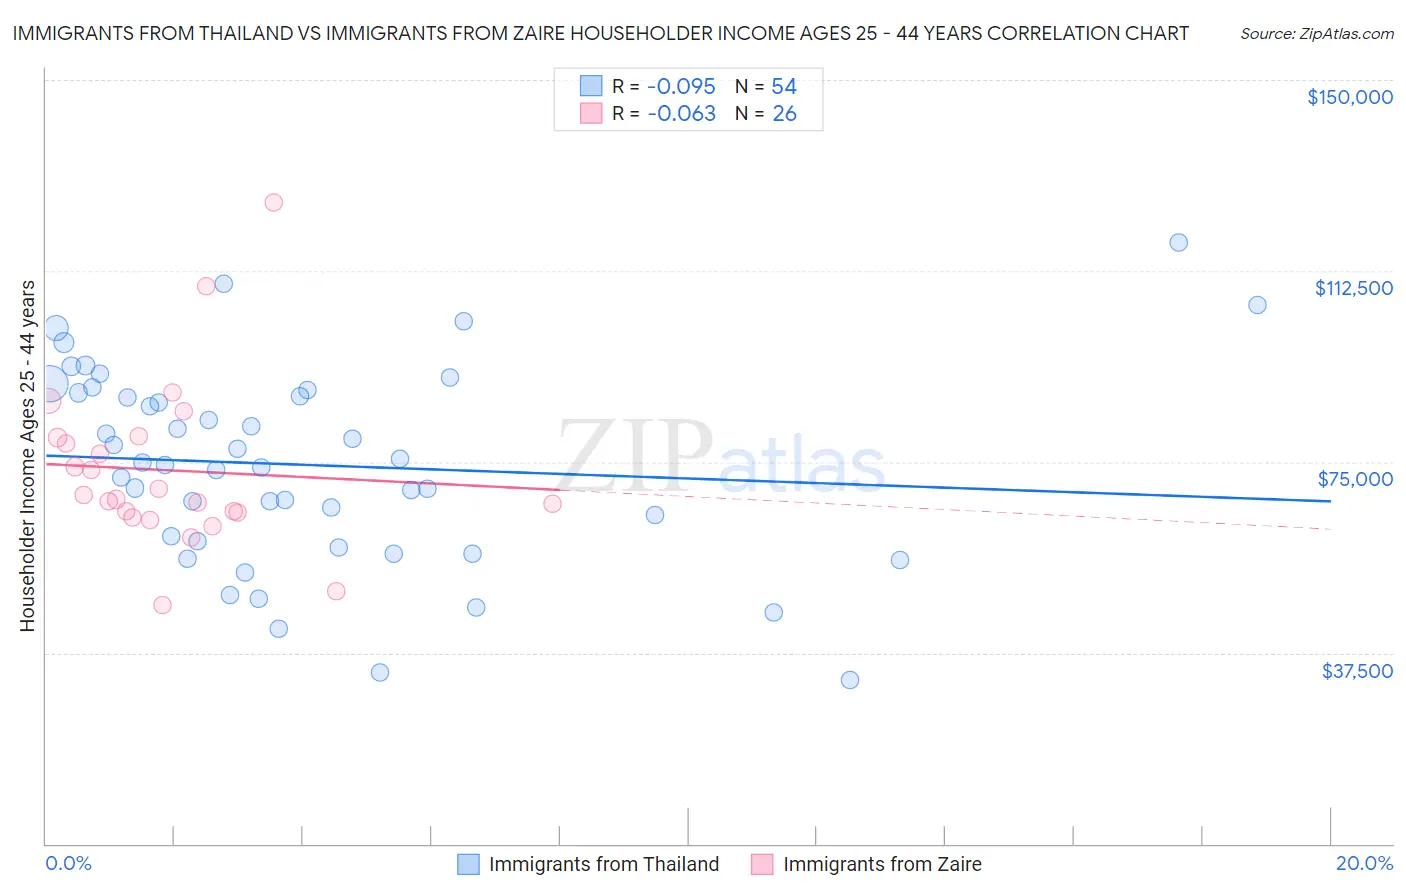 Immigrants from Thailand vs Immigrants from Zaire Householder Income Ages 25 - 44 years